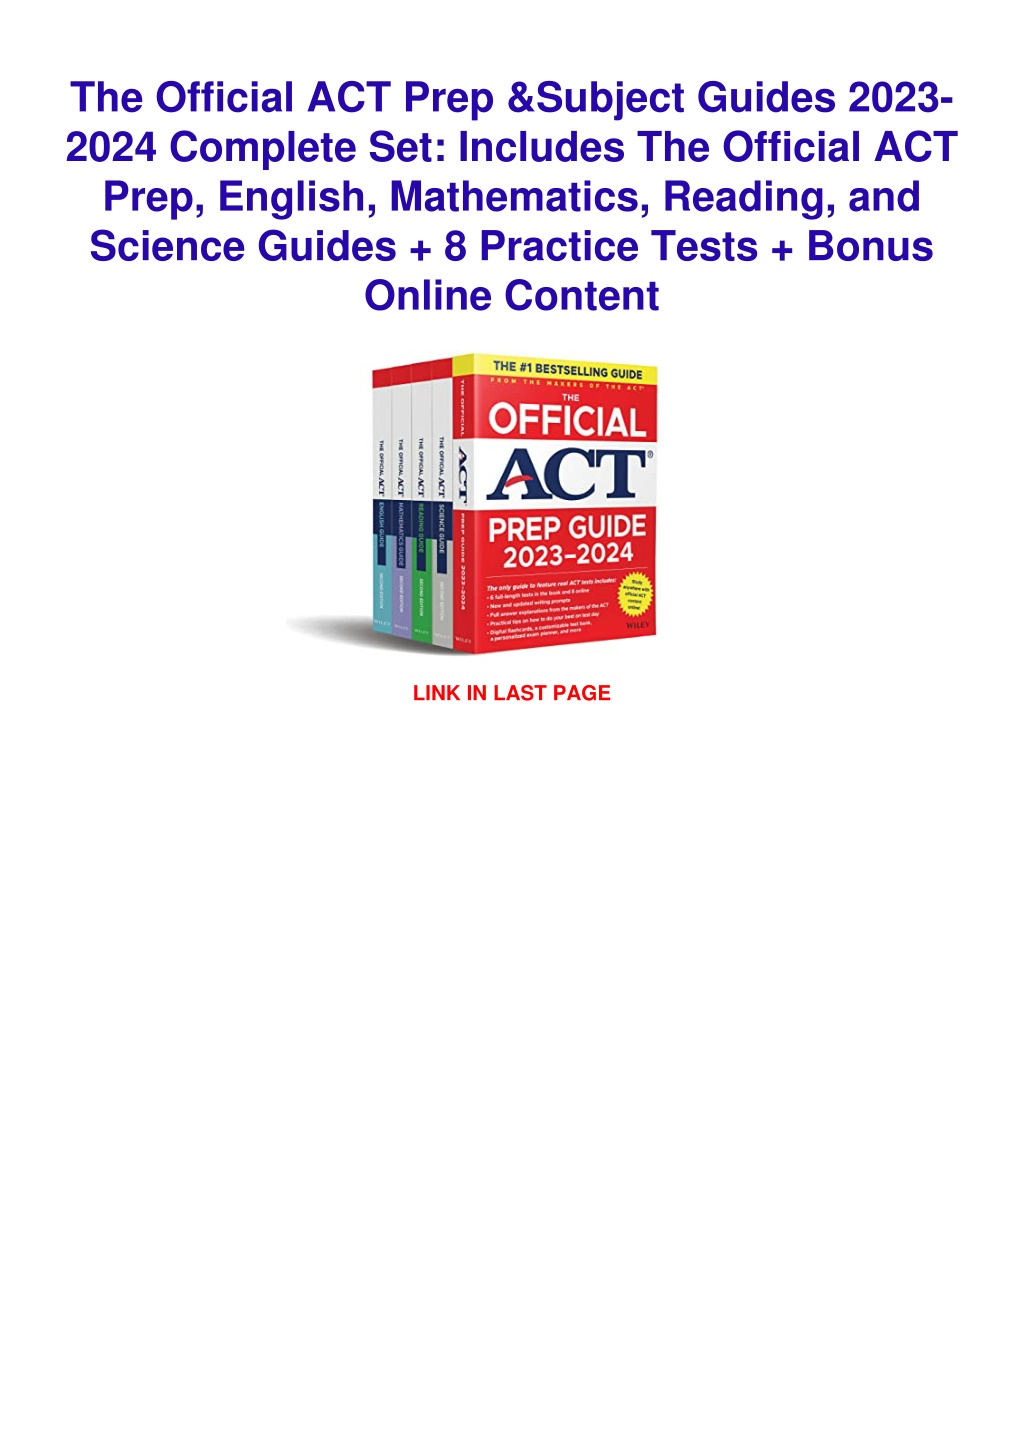 PPT get [PDF] Download The Official ACT Prep & Subject Guides 2023